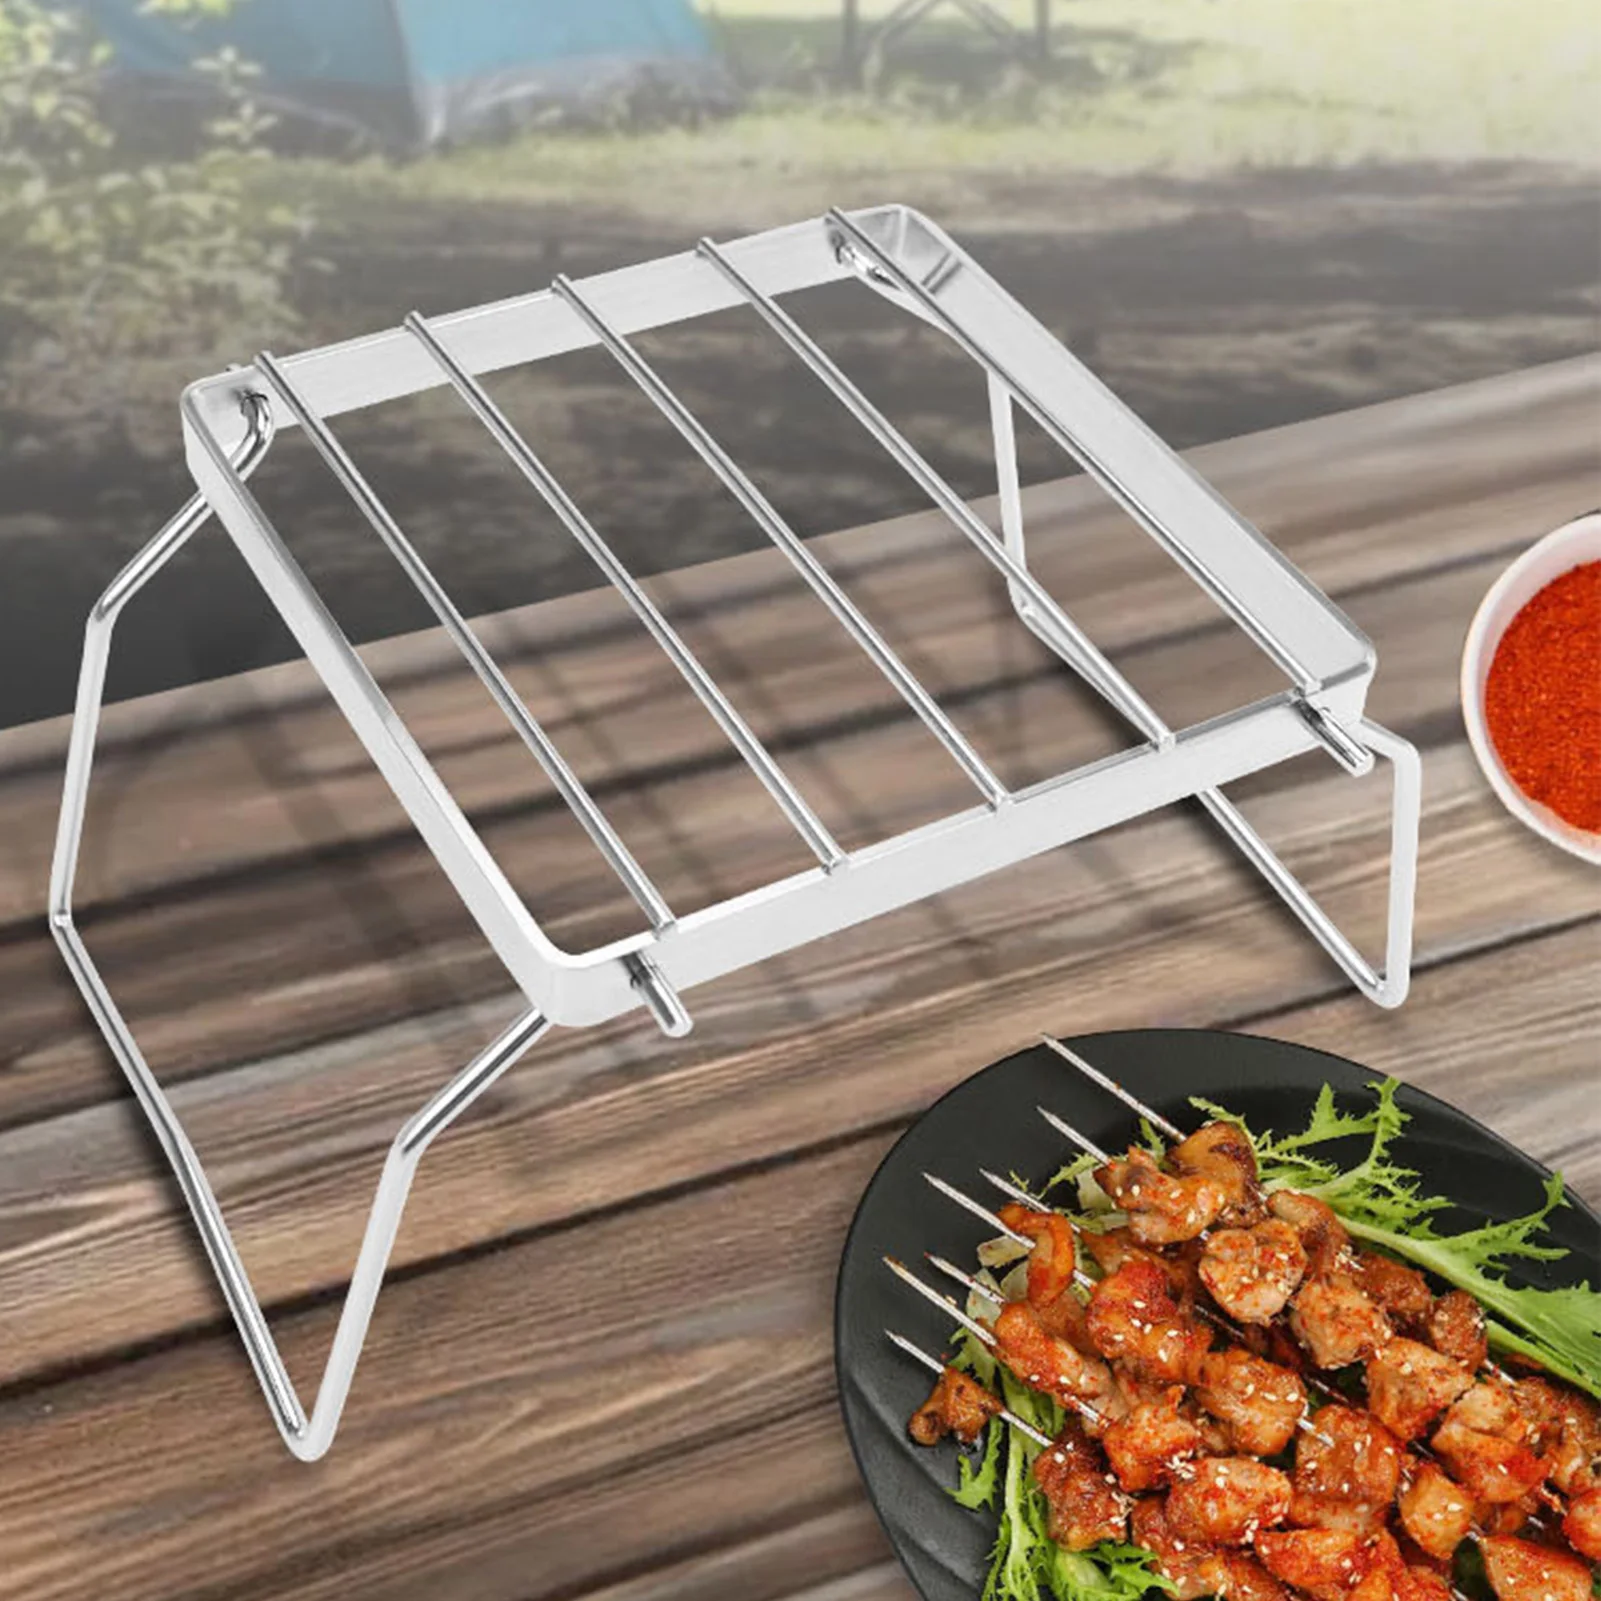 

Stainless Steel Folding Grill Rack Portable Outdoor Camping Stove Oven Campfire BBQ Grill Stand Barbecue Tool Accessories